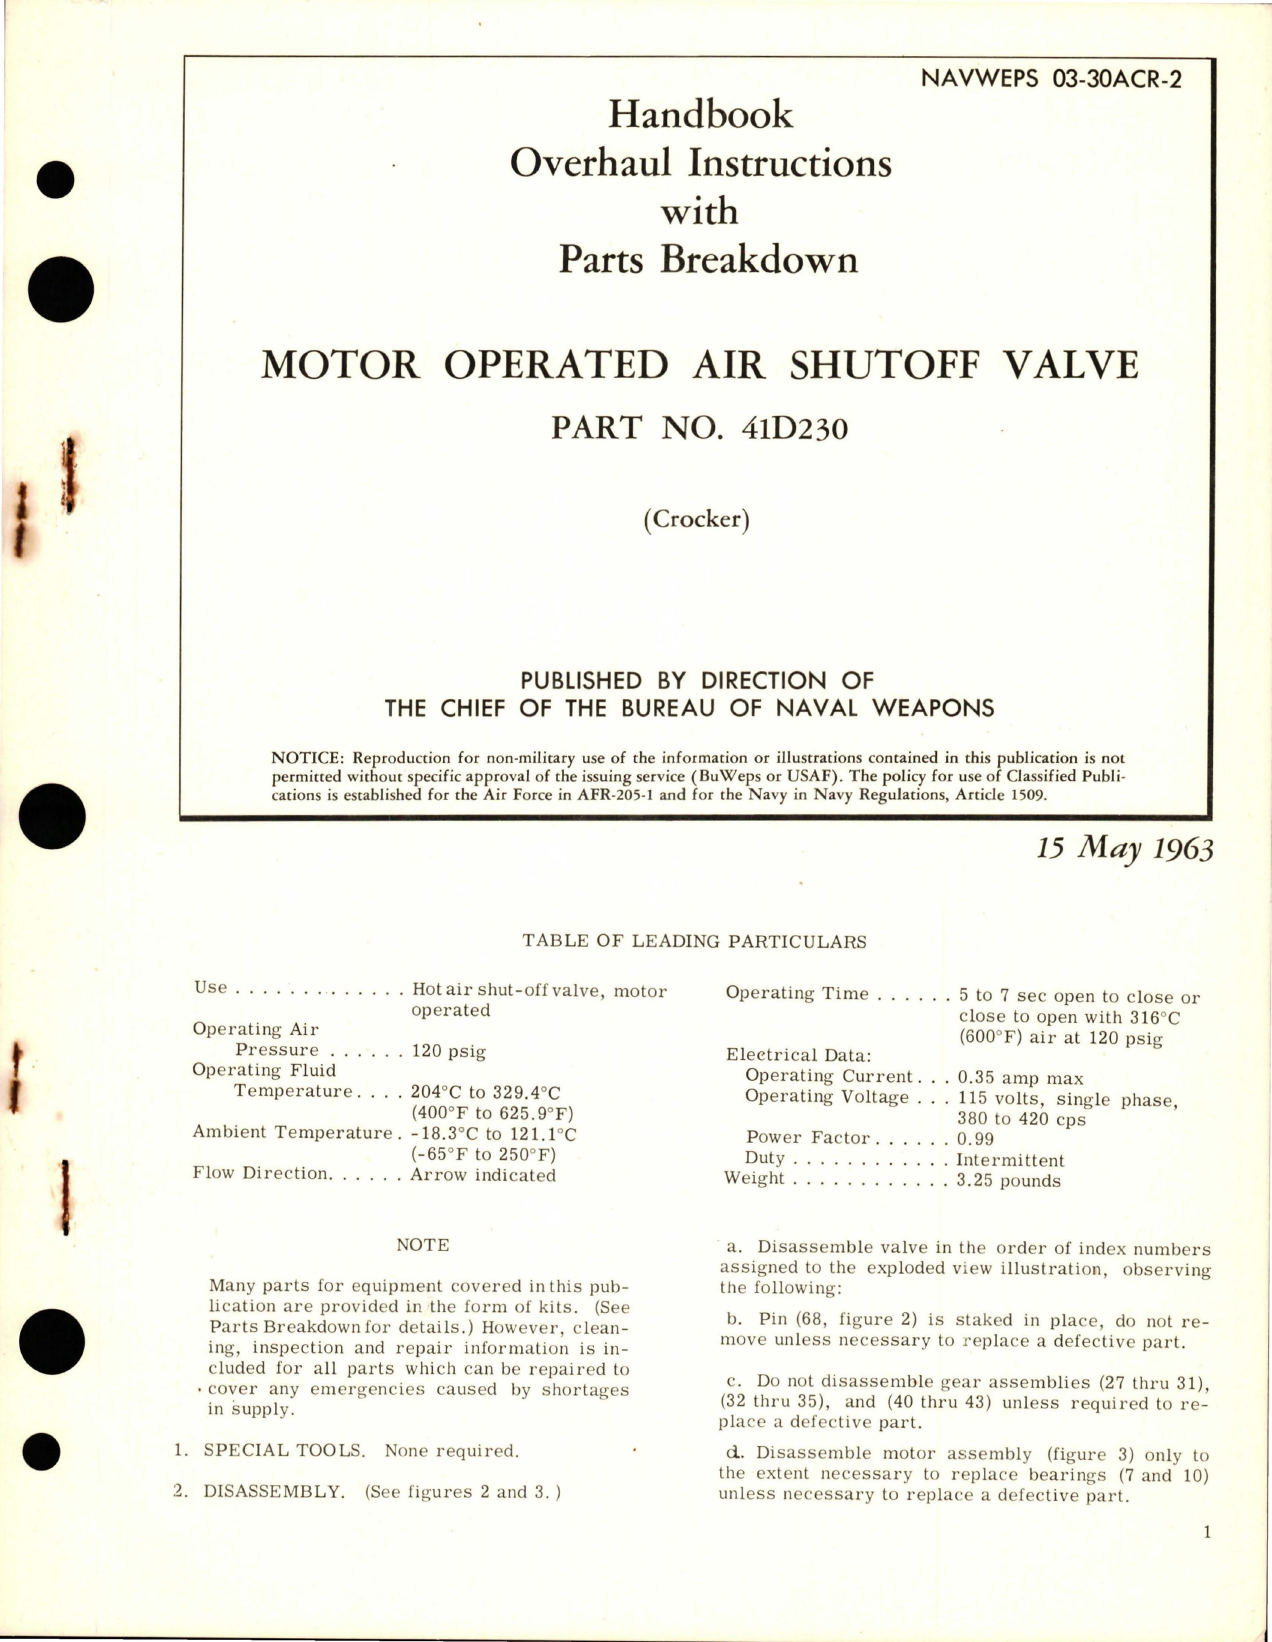 Sample page 1 from AirCorps Library document: Overhaul Instructions with Parts Breakdown for Motor Operated Air Shutoff Valve - Part 41D230